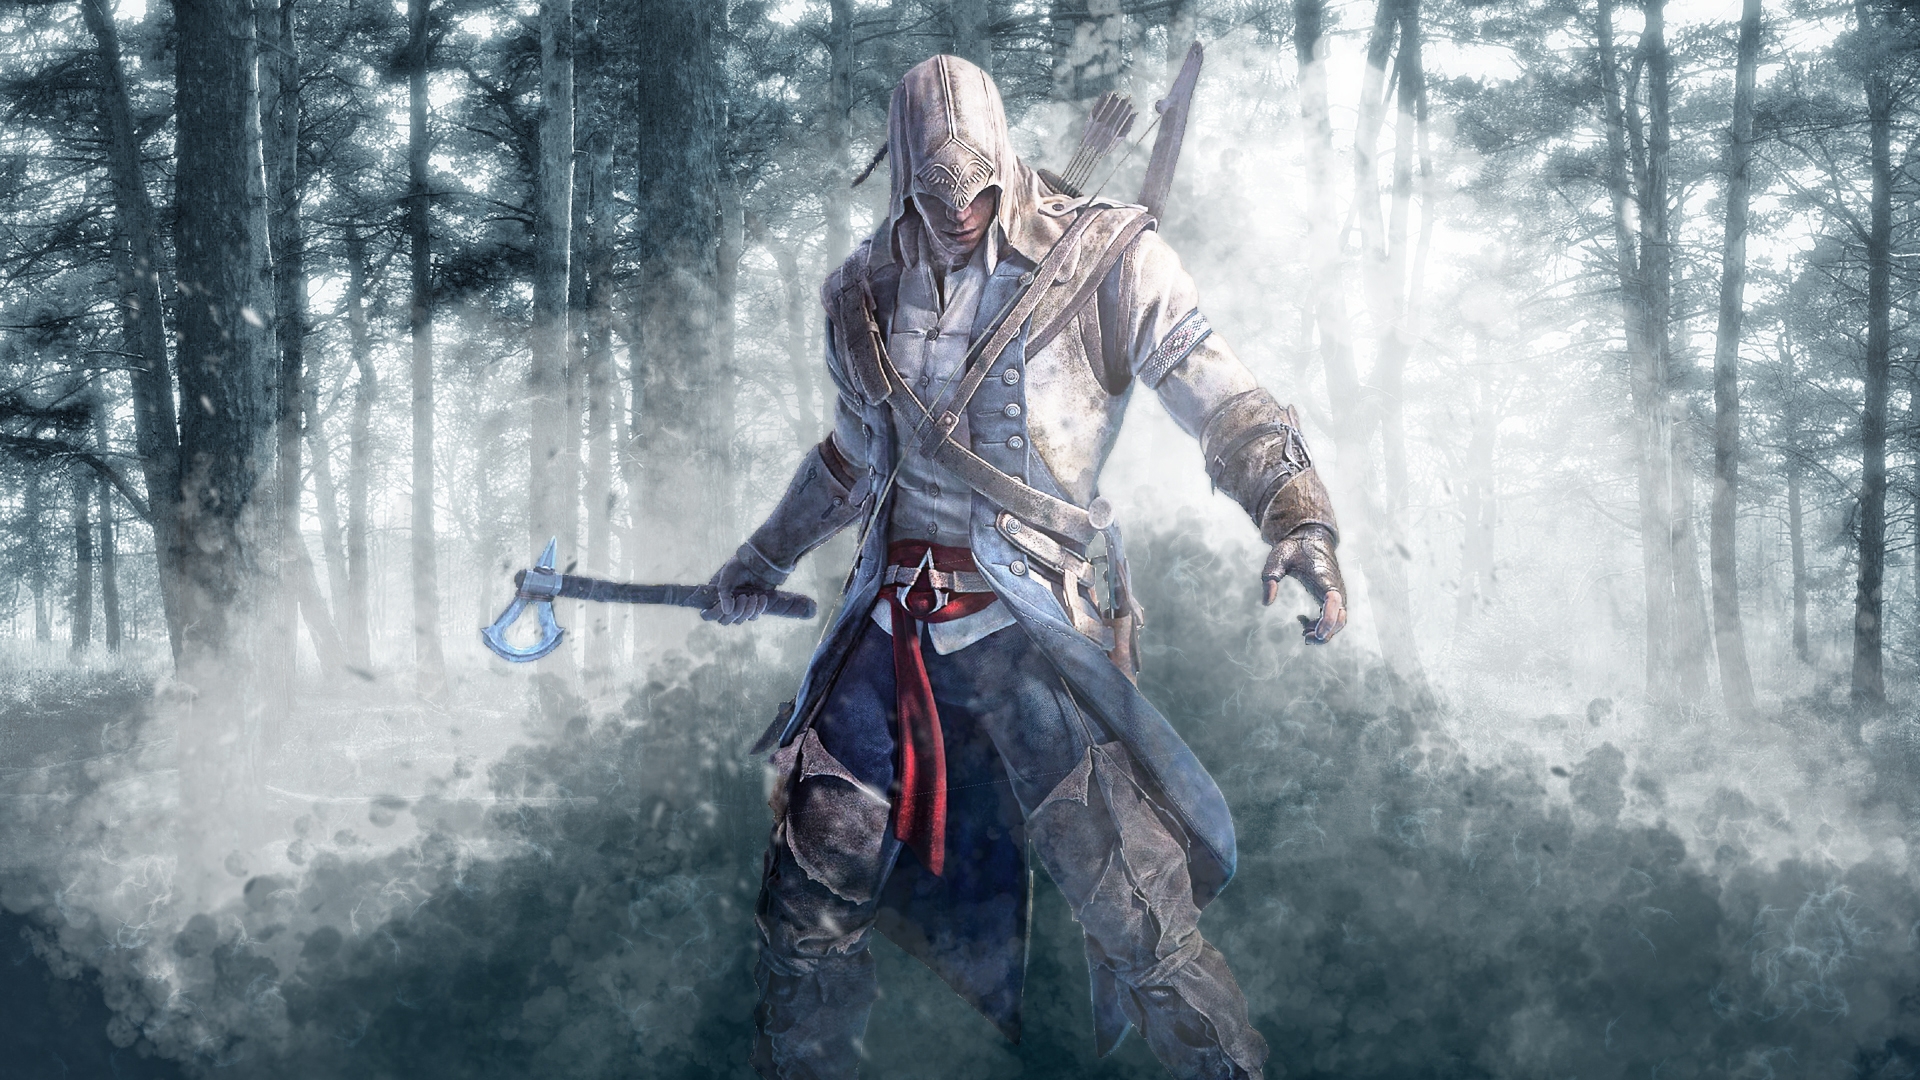 wallpaper of assassin creed,action adventure game,pc game,adventure game,screenshot,knight